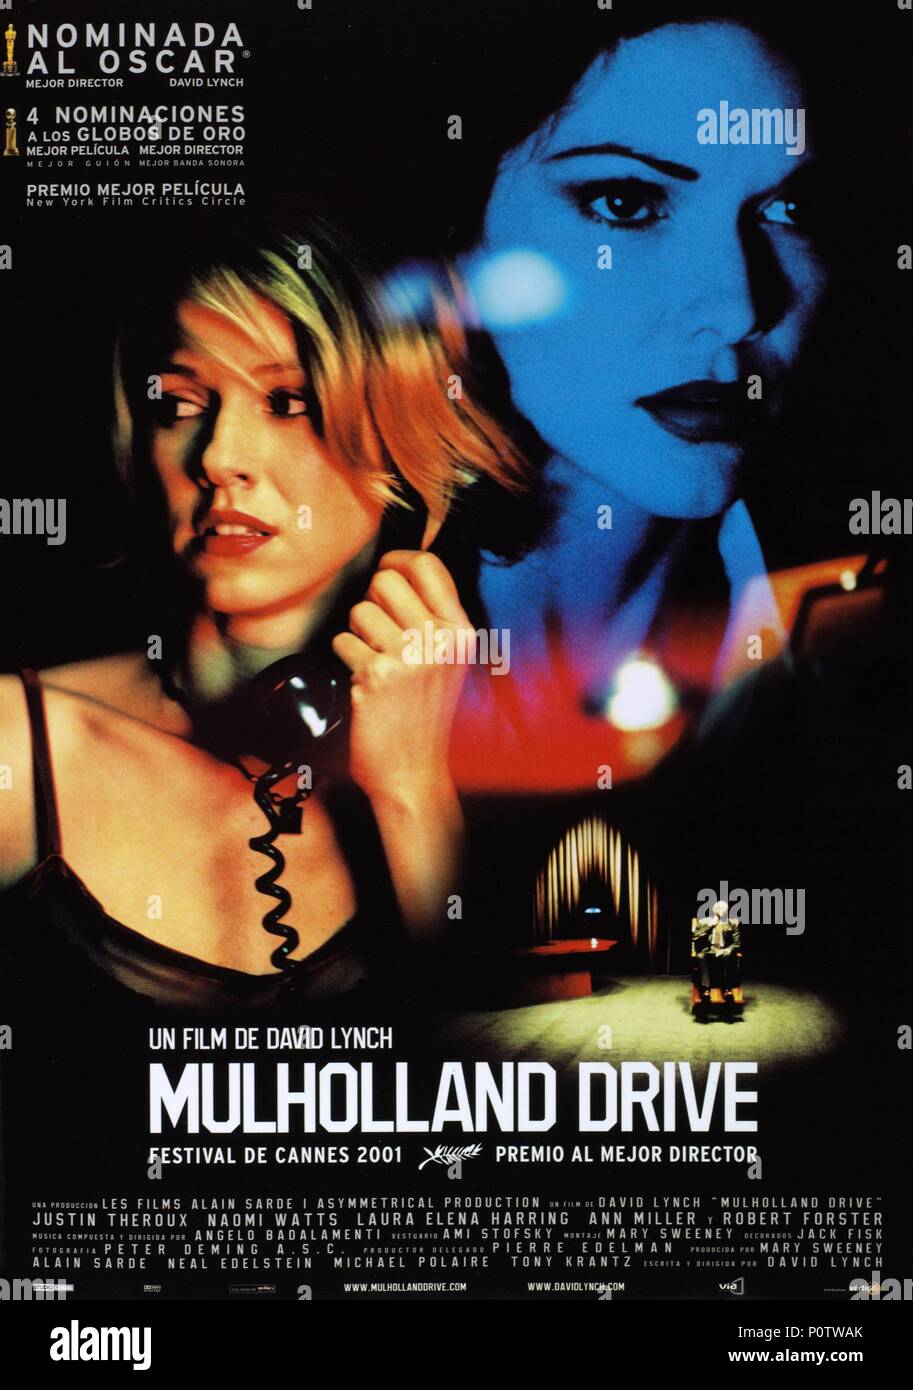 Mulholland drive download hp officejet 4500 software free download